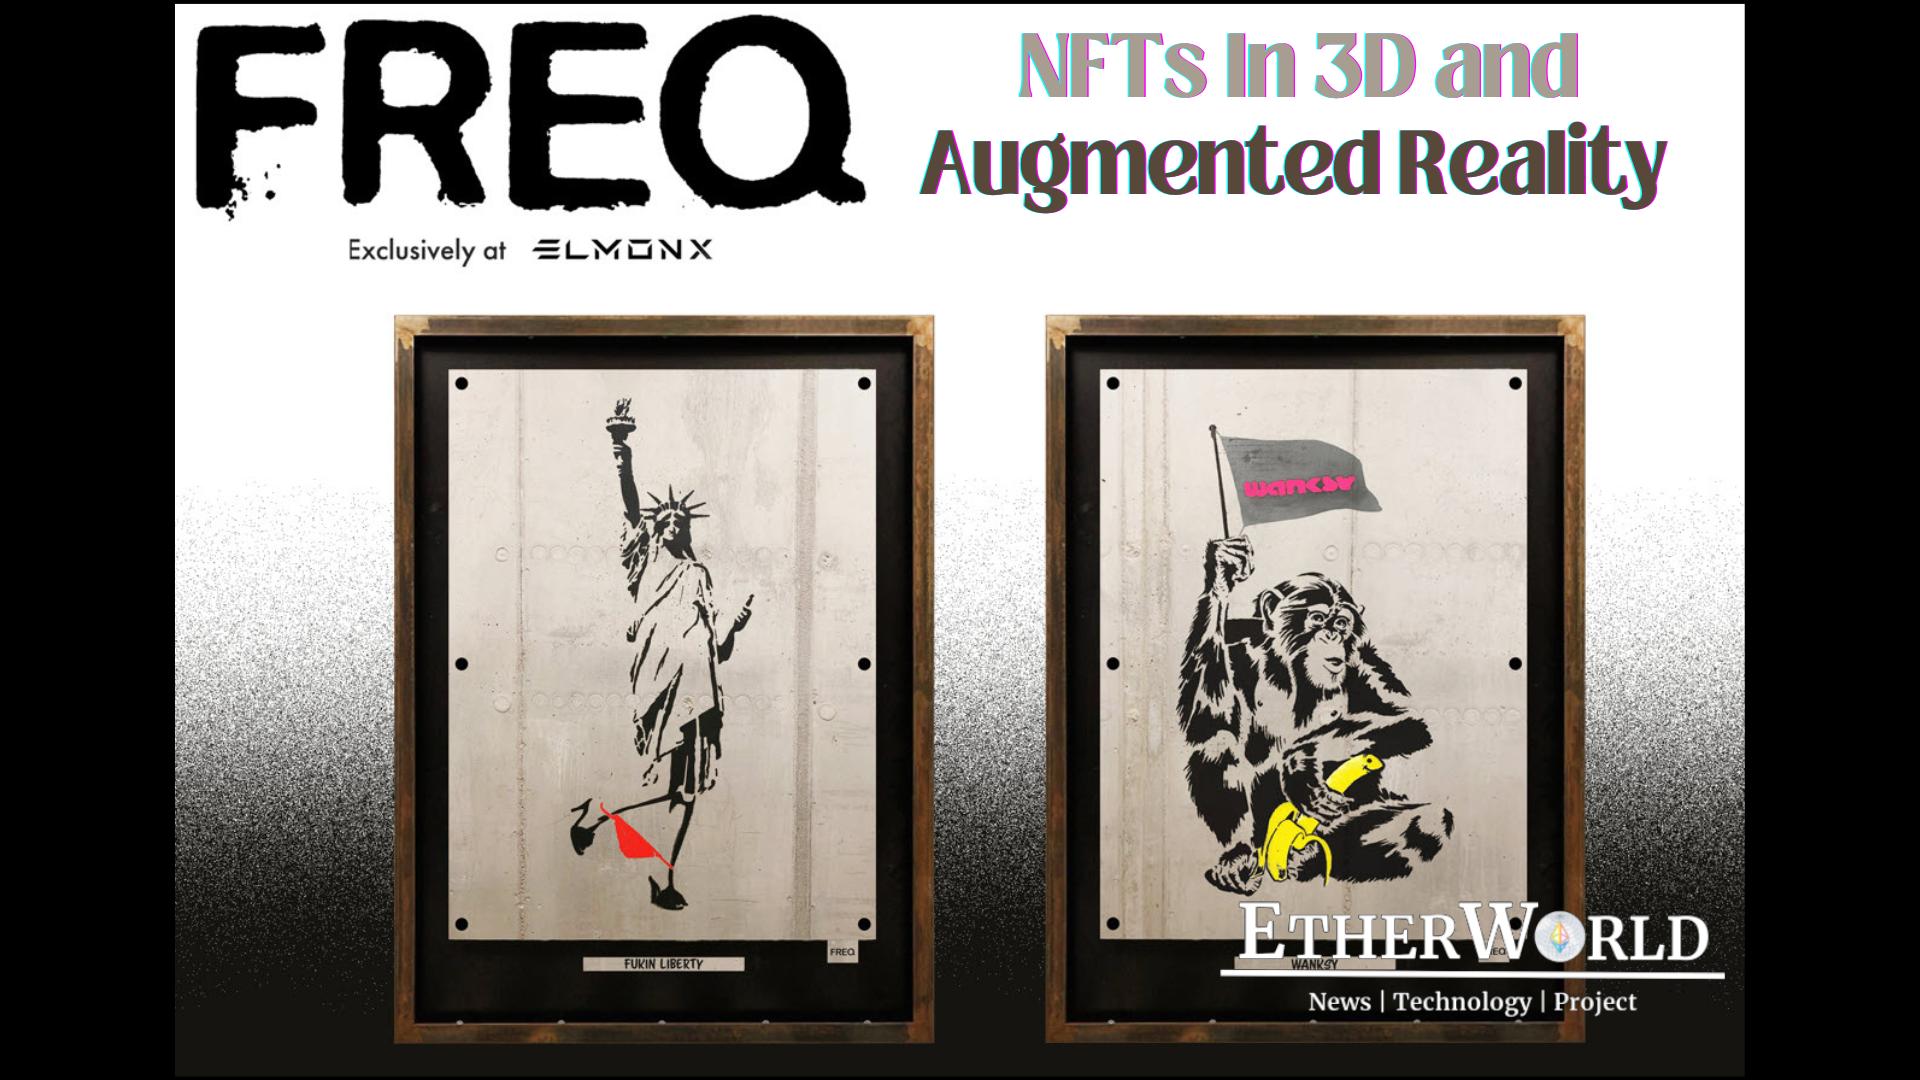 Exclusive “FREQ” NFTs In 3D and Augmented Reality on ElmonX